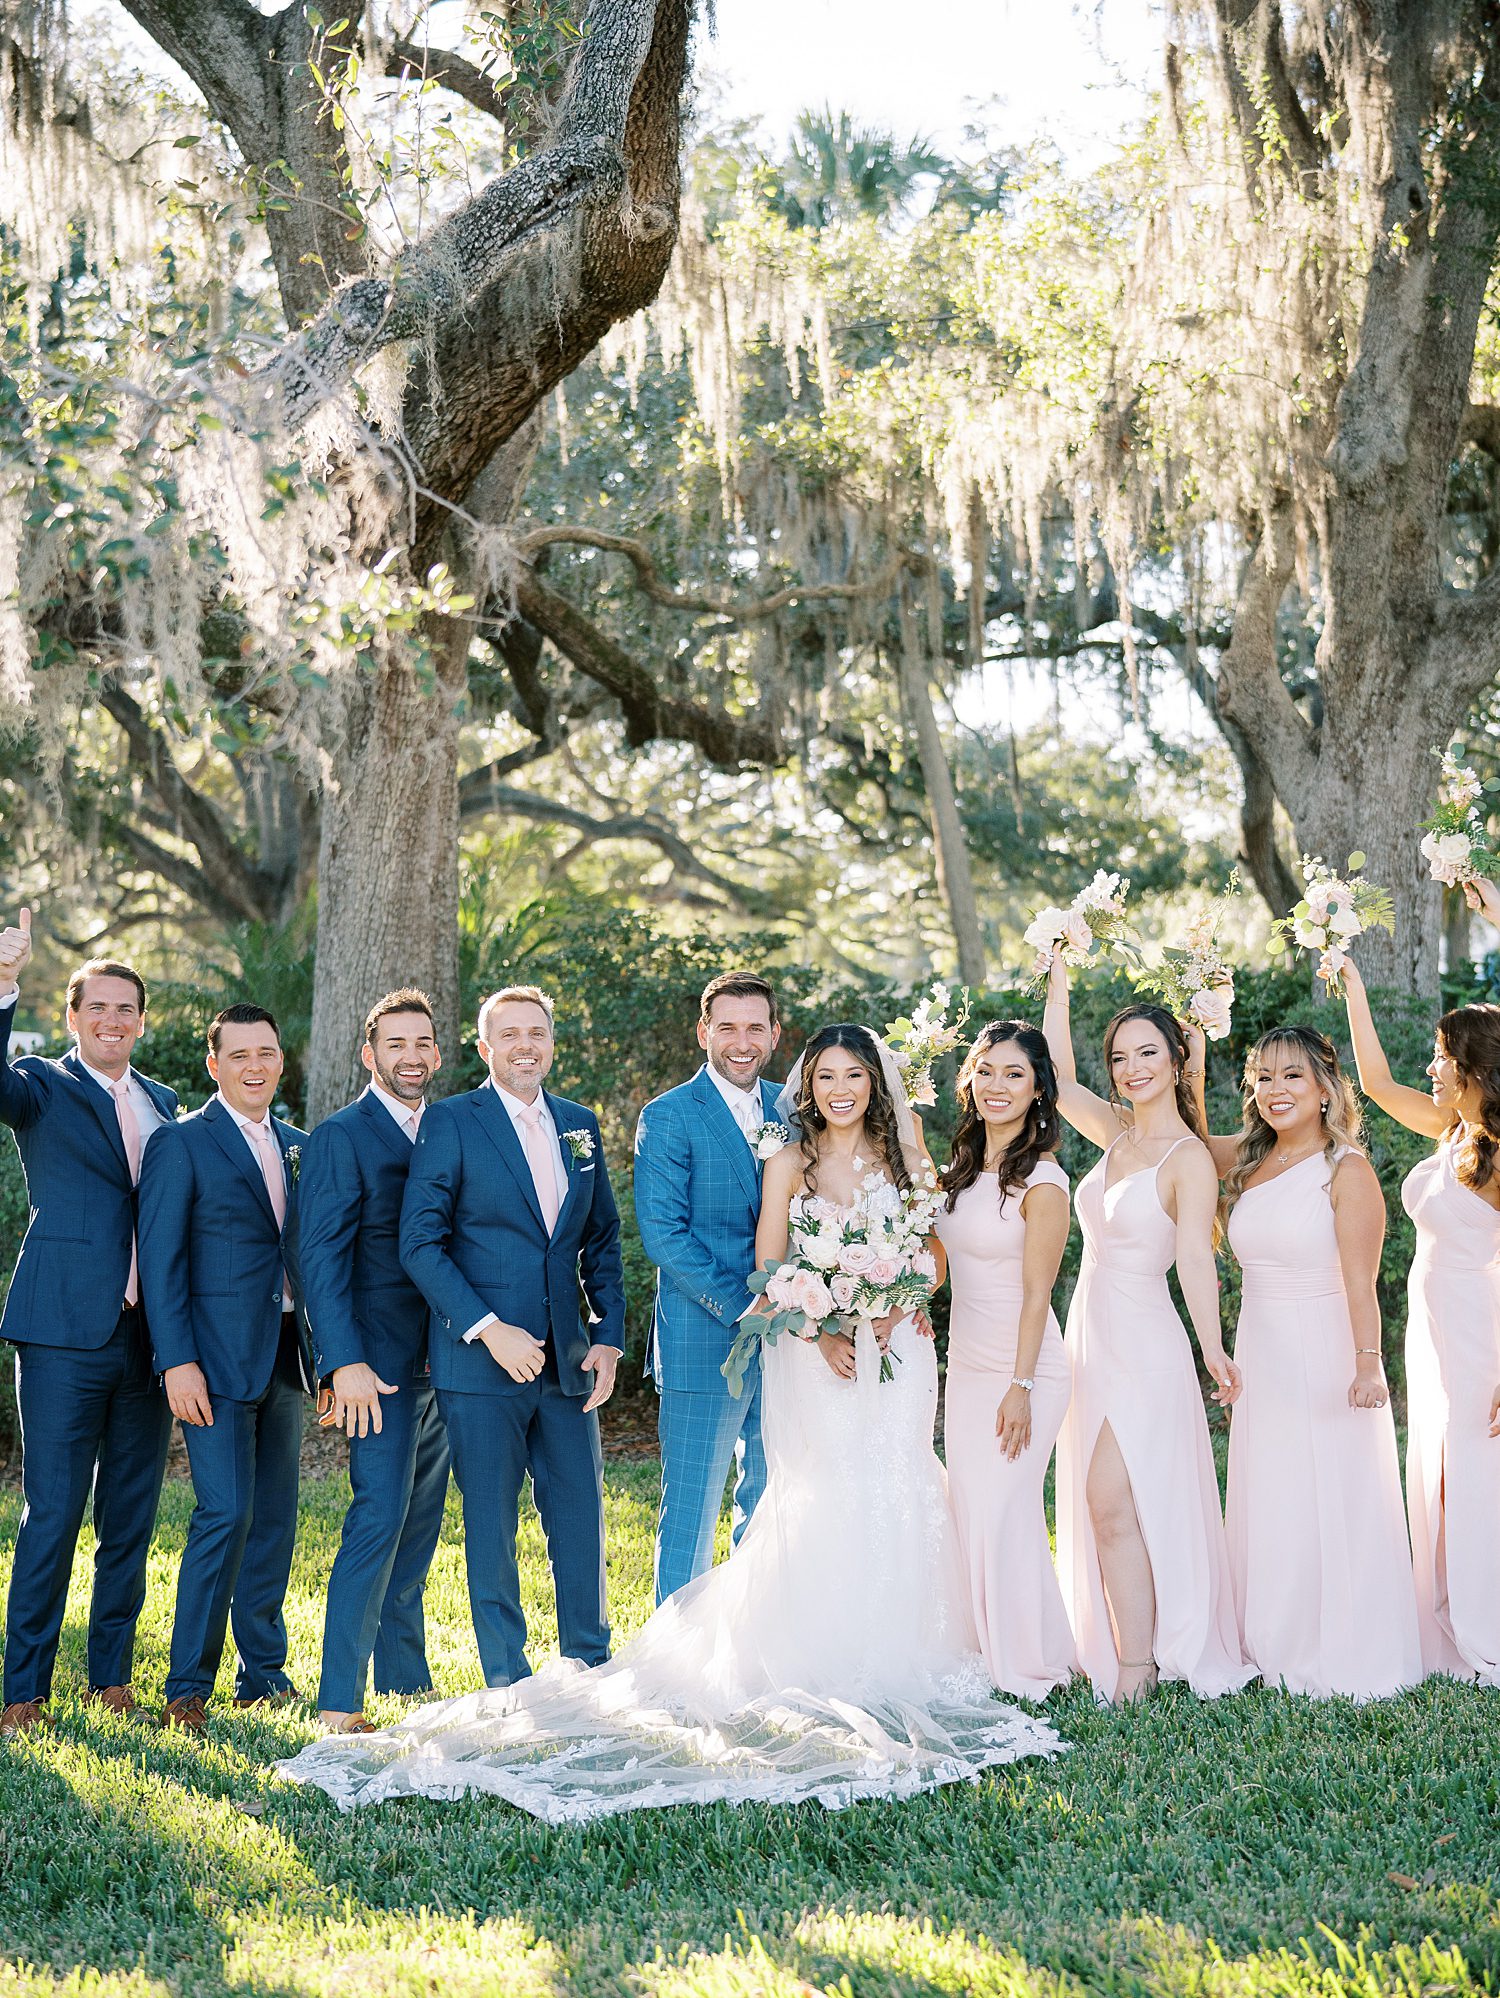 newlyweds pose with wedding party in blush dresses and navy suits 